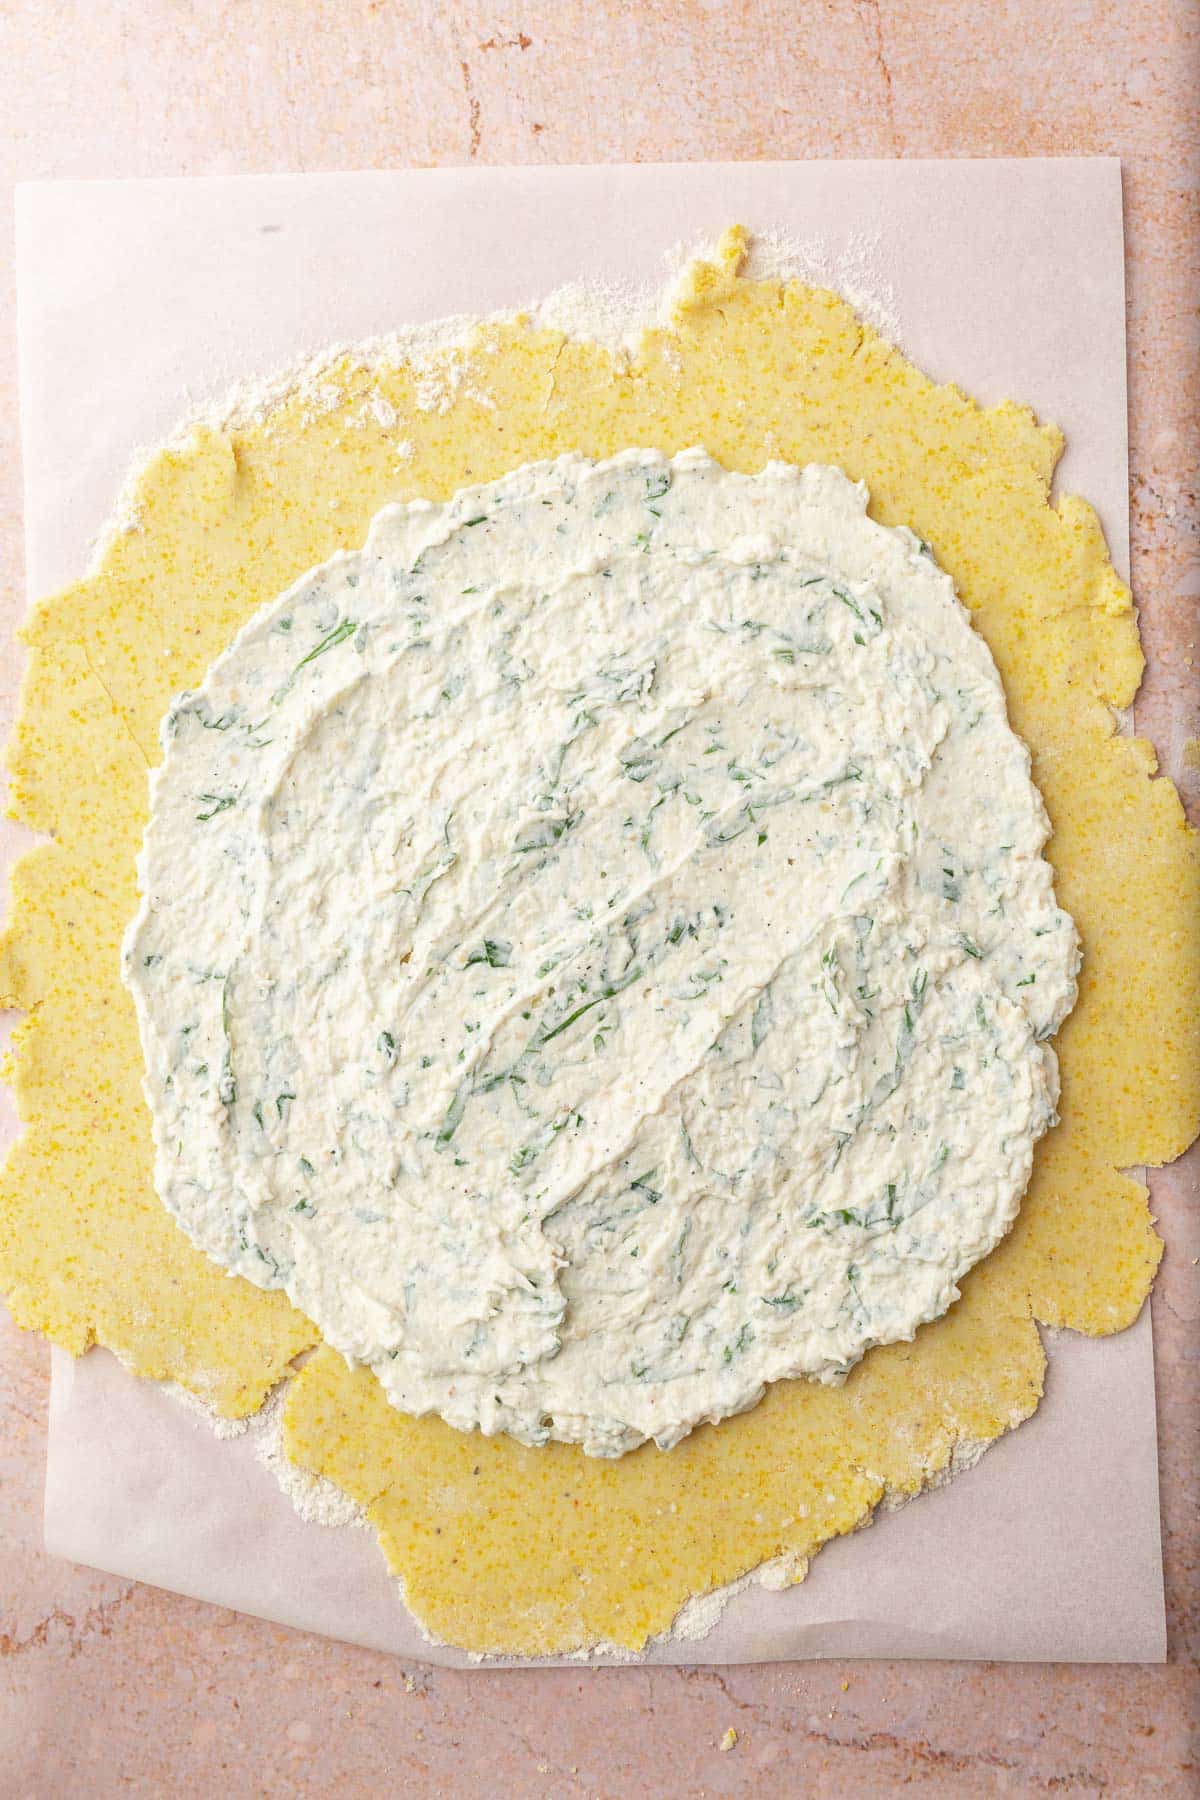 A ricotta herb mixture that has been spread over a round piece of gluten-free tart dough to make a tomato galette.